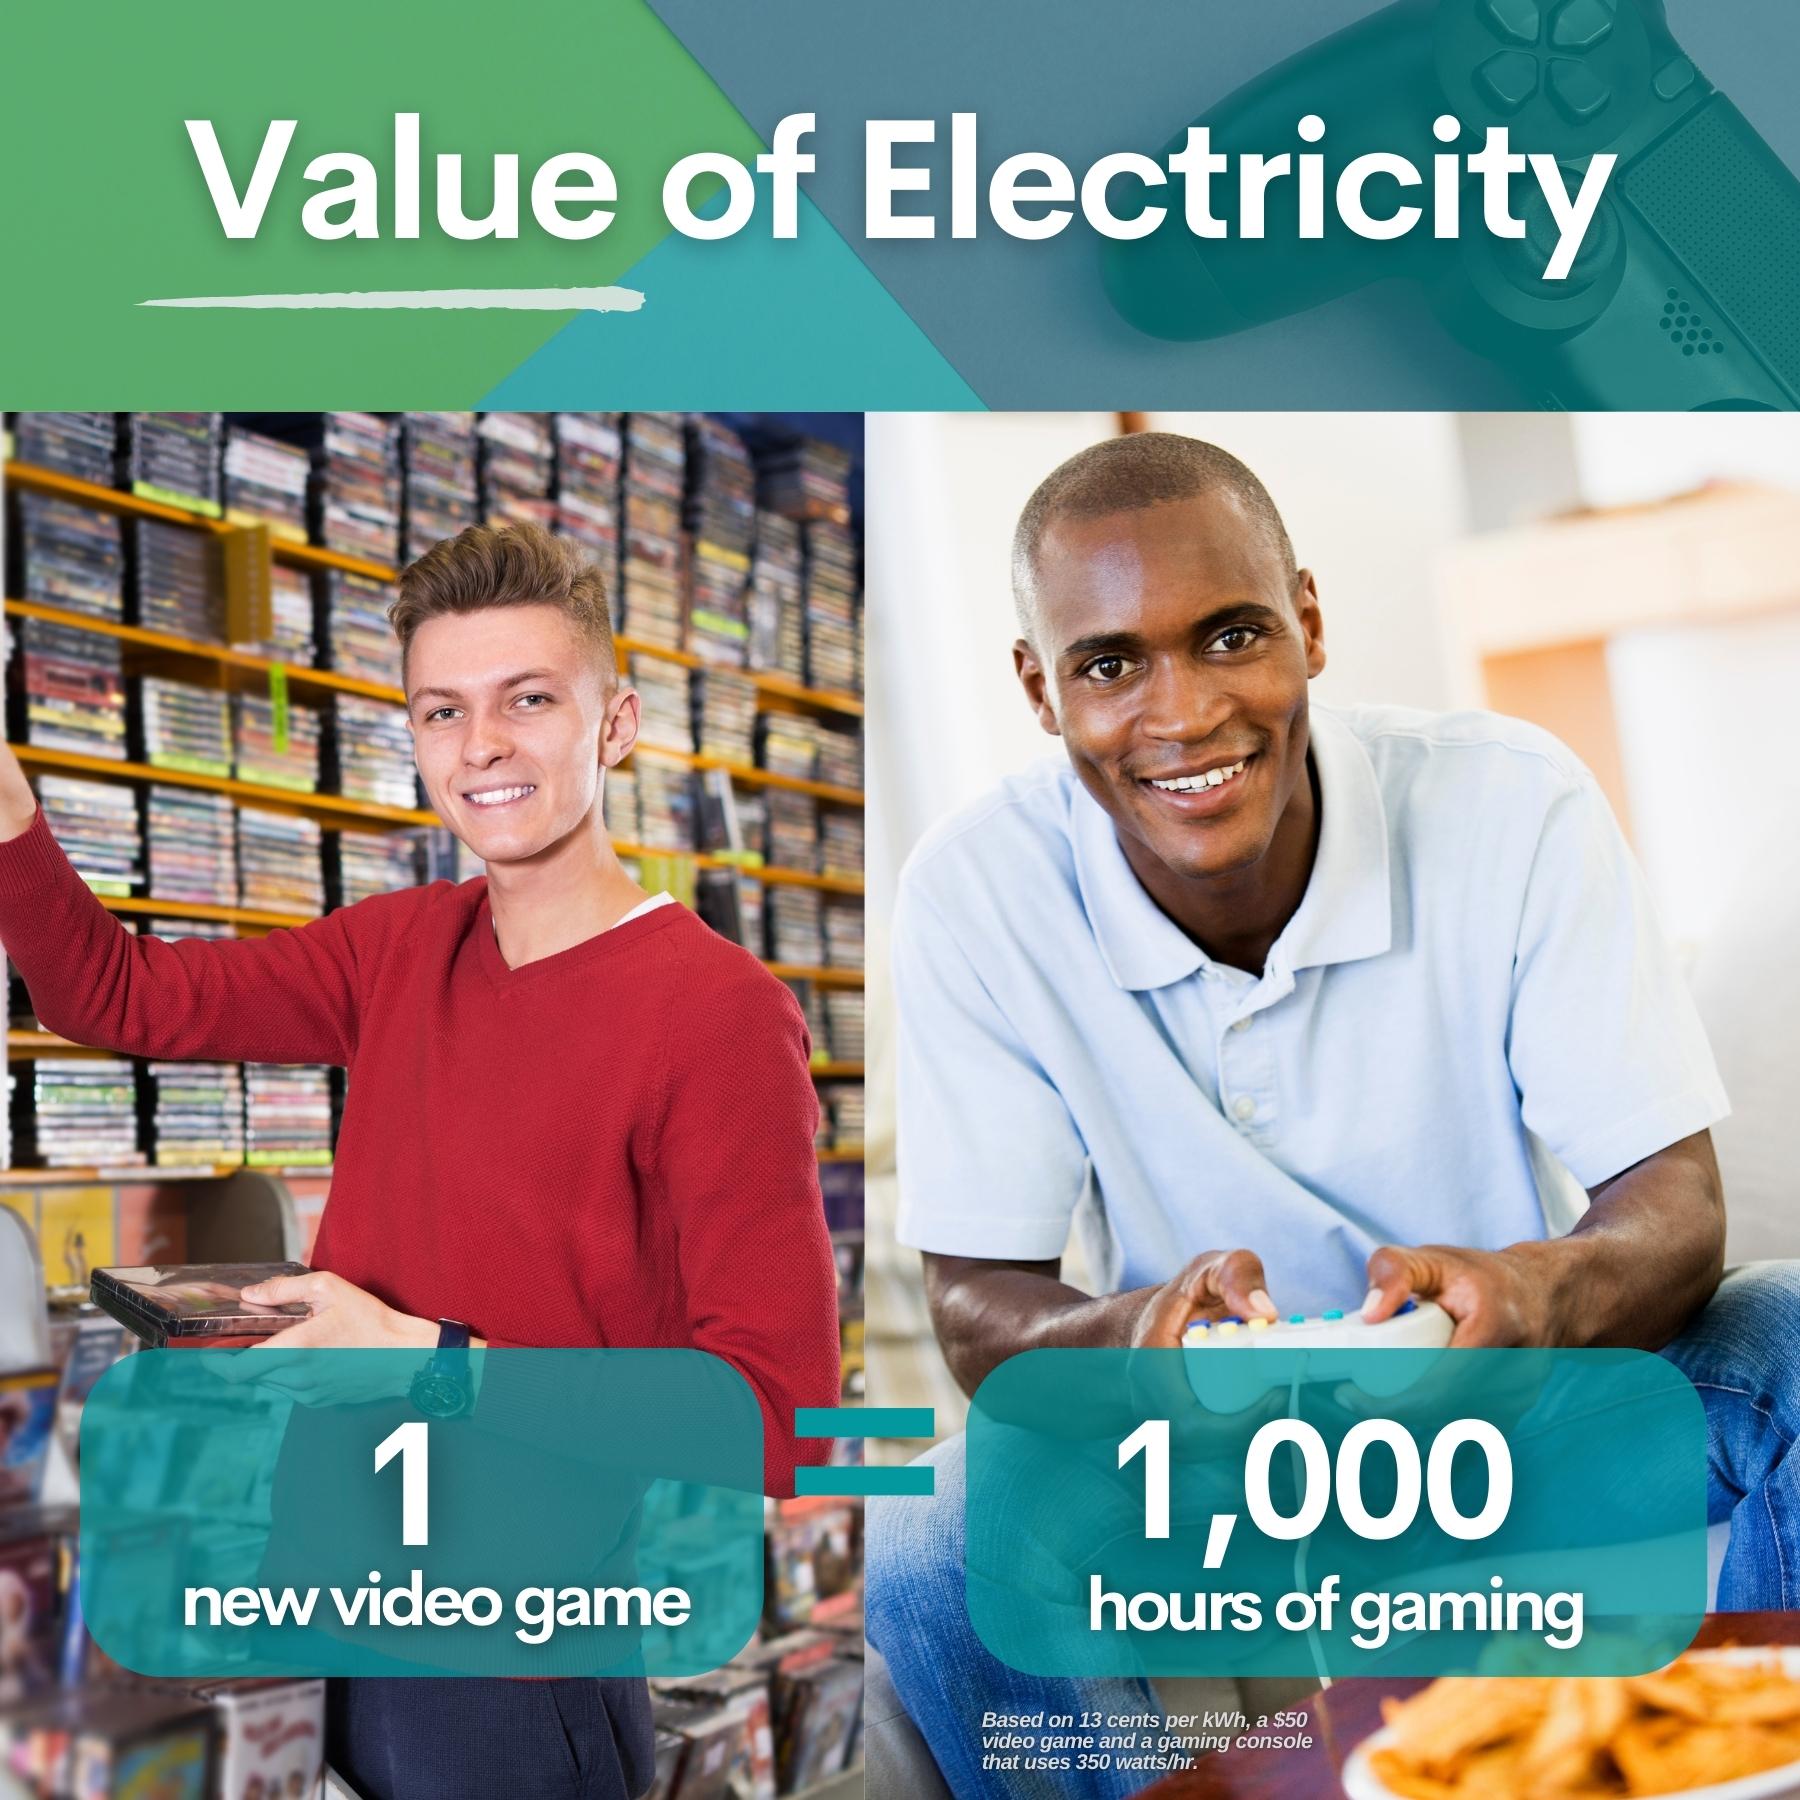 Photo showing cost of 1 video game is equal to the electricity cost of 1,000 hours of playing a game.